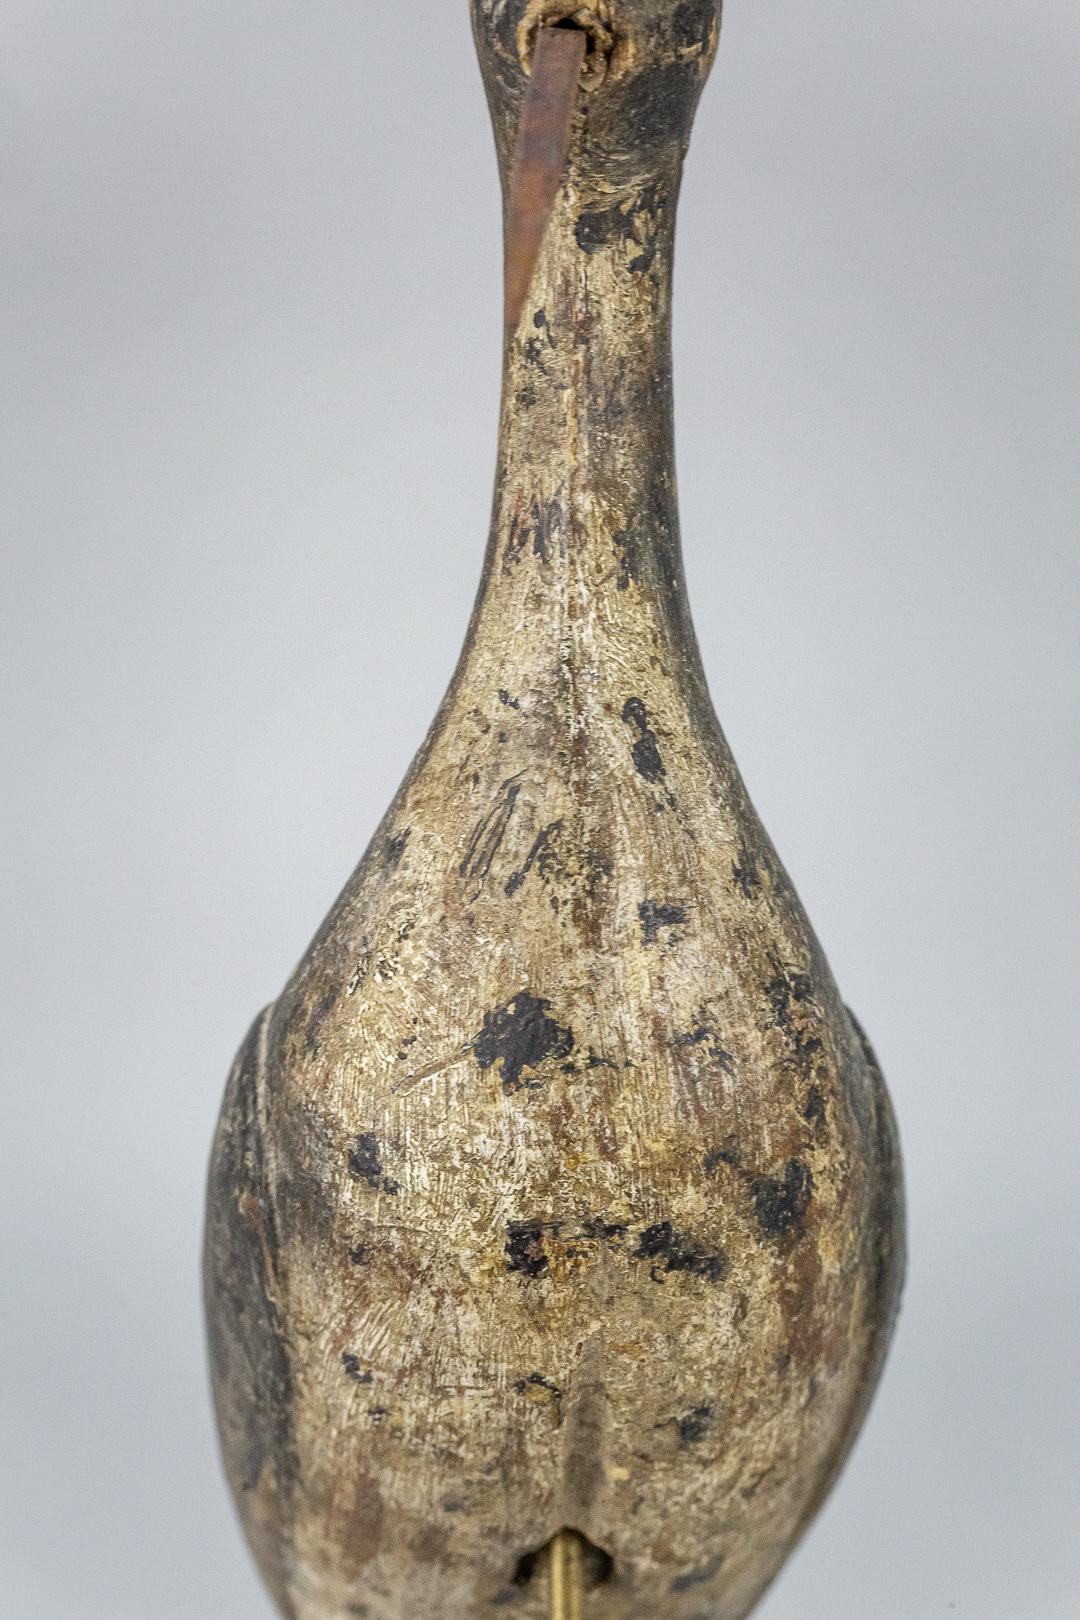 Wonderfully sculptural working shorebird decoy, found in original paint. Most likely a replacement beak. Later bespoke made stand, France, circa 1880.